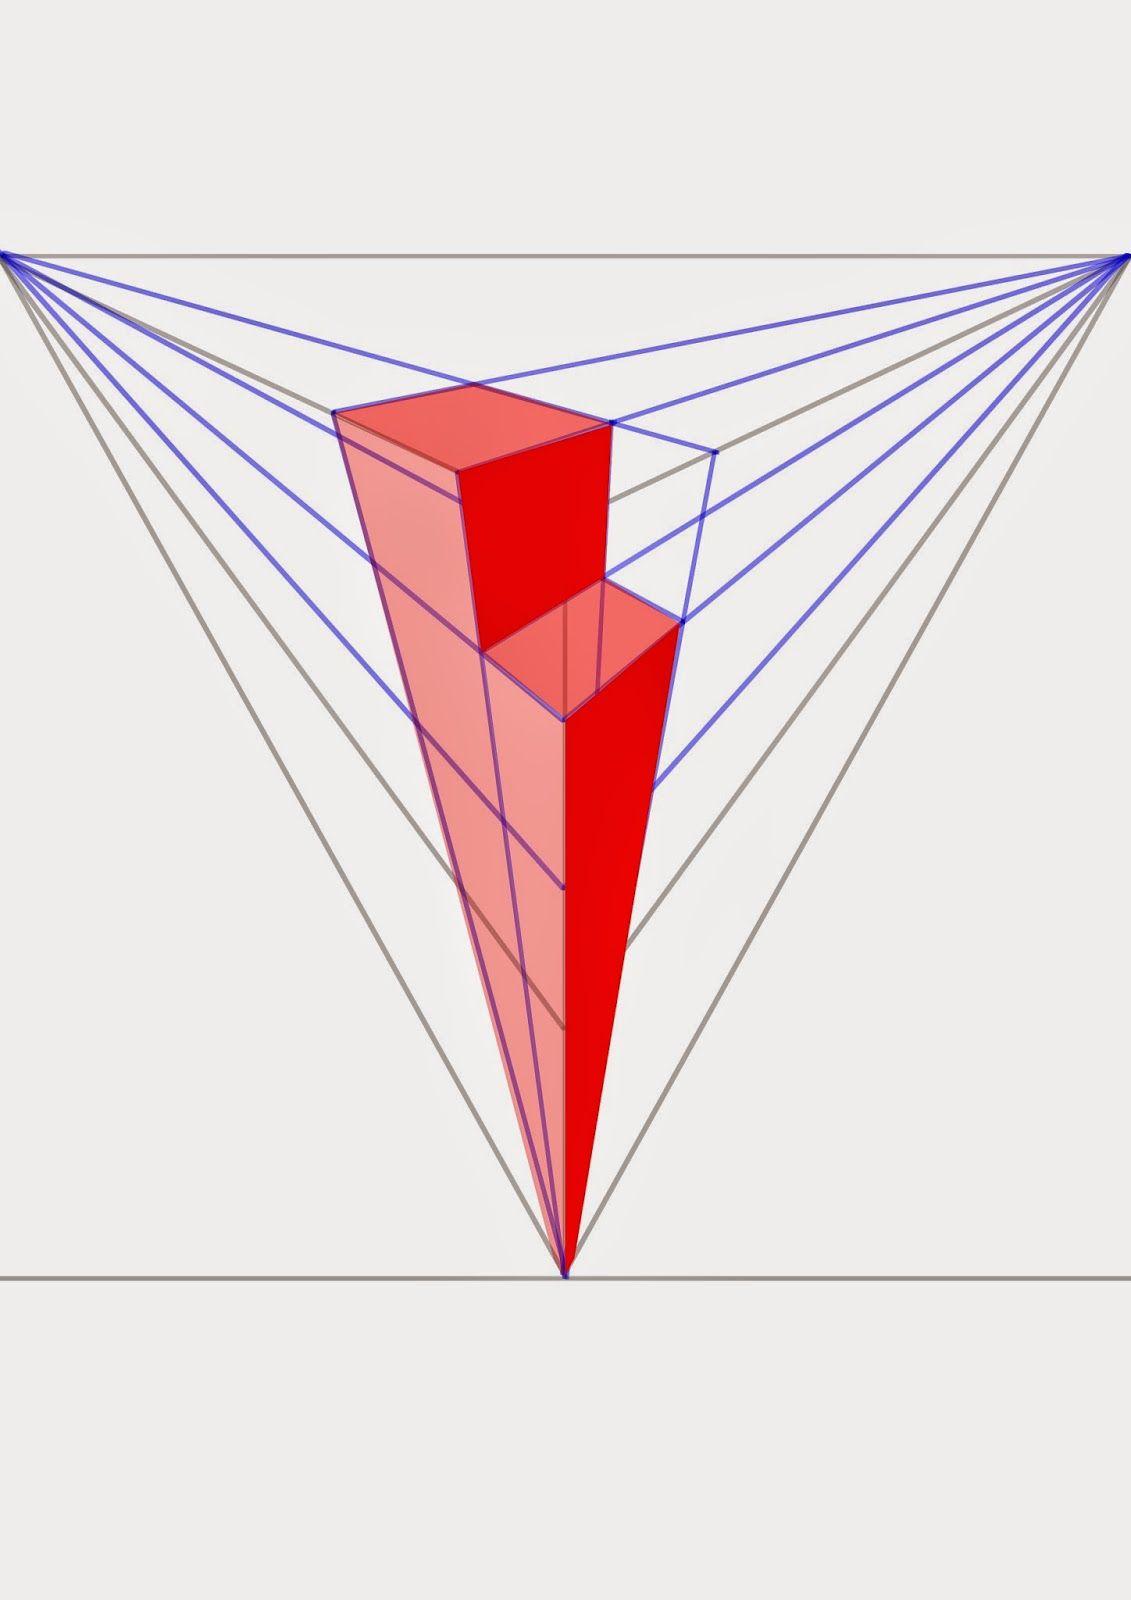 Three-Point Red Triangle Logo - Max Ashby's Art Blog: One, Two and Three point perspective